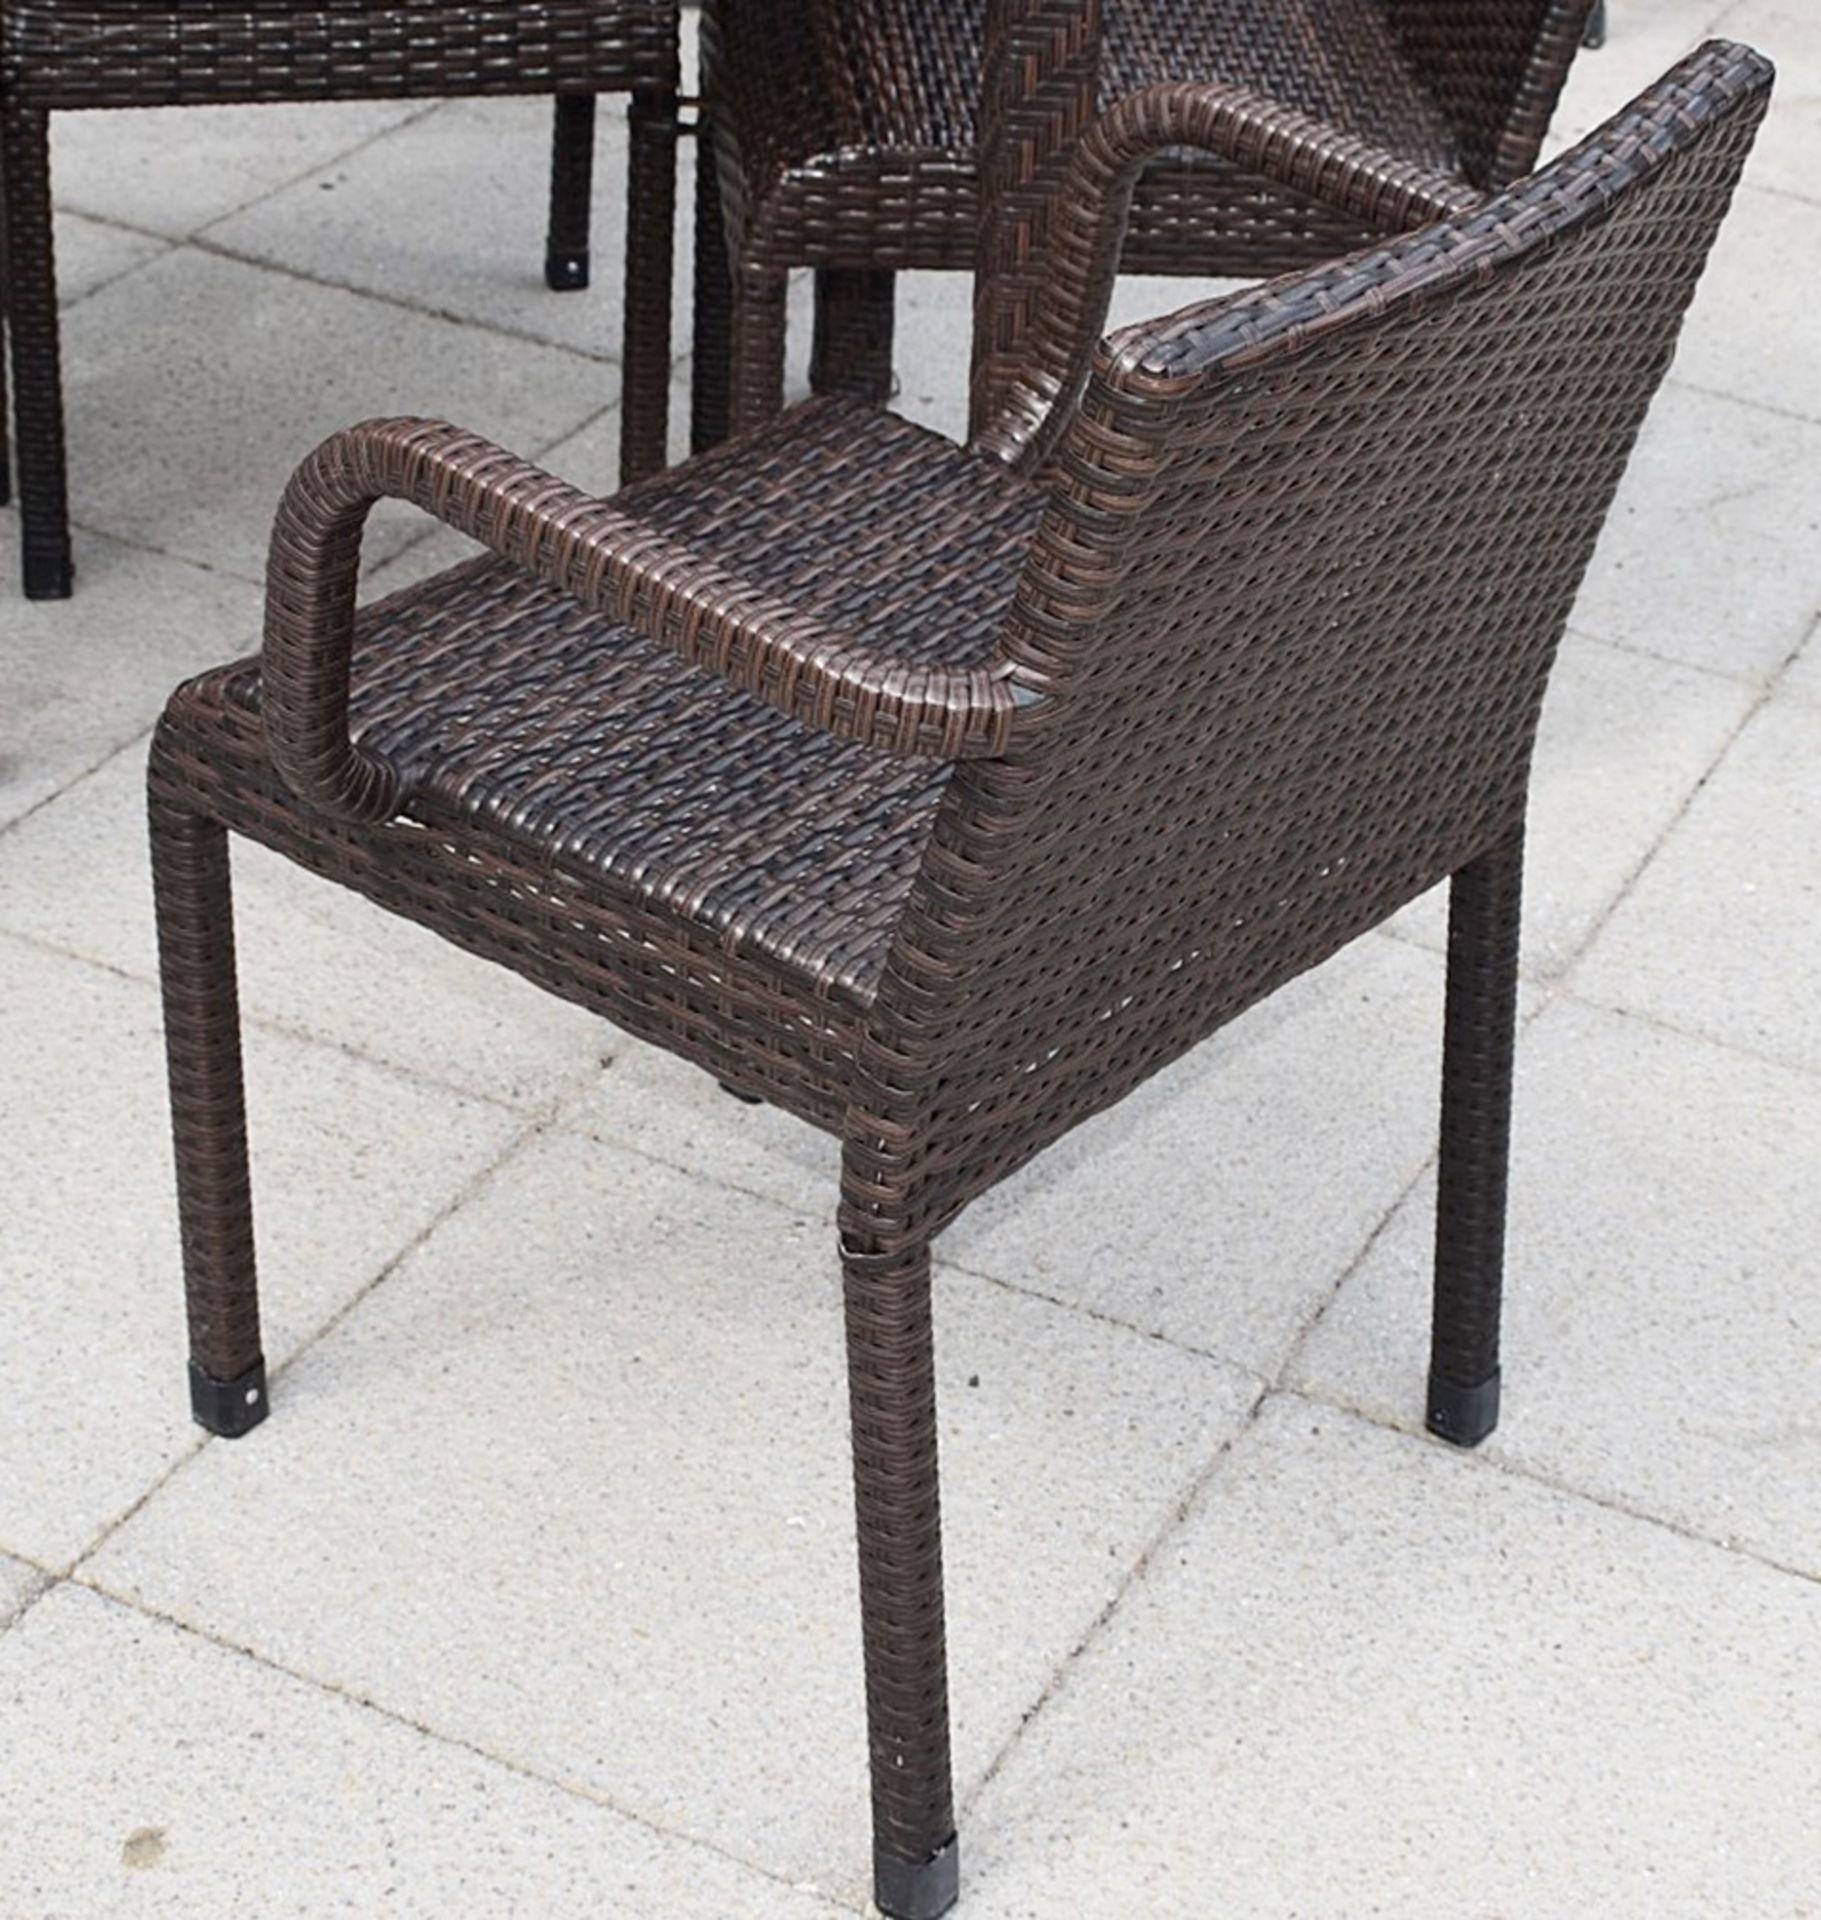 4 x Outdoor Rattan Garden Chairs With A Matching Square Table - Image 5 of 5